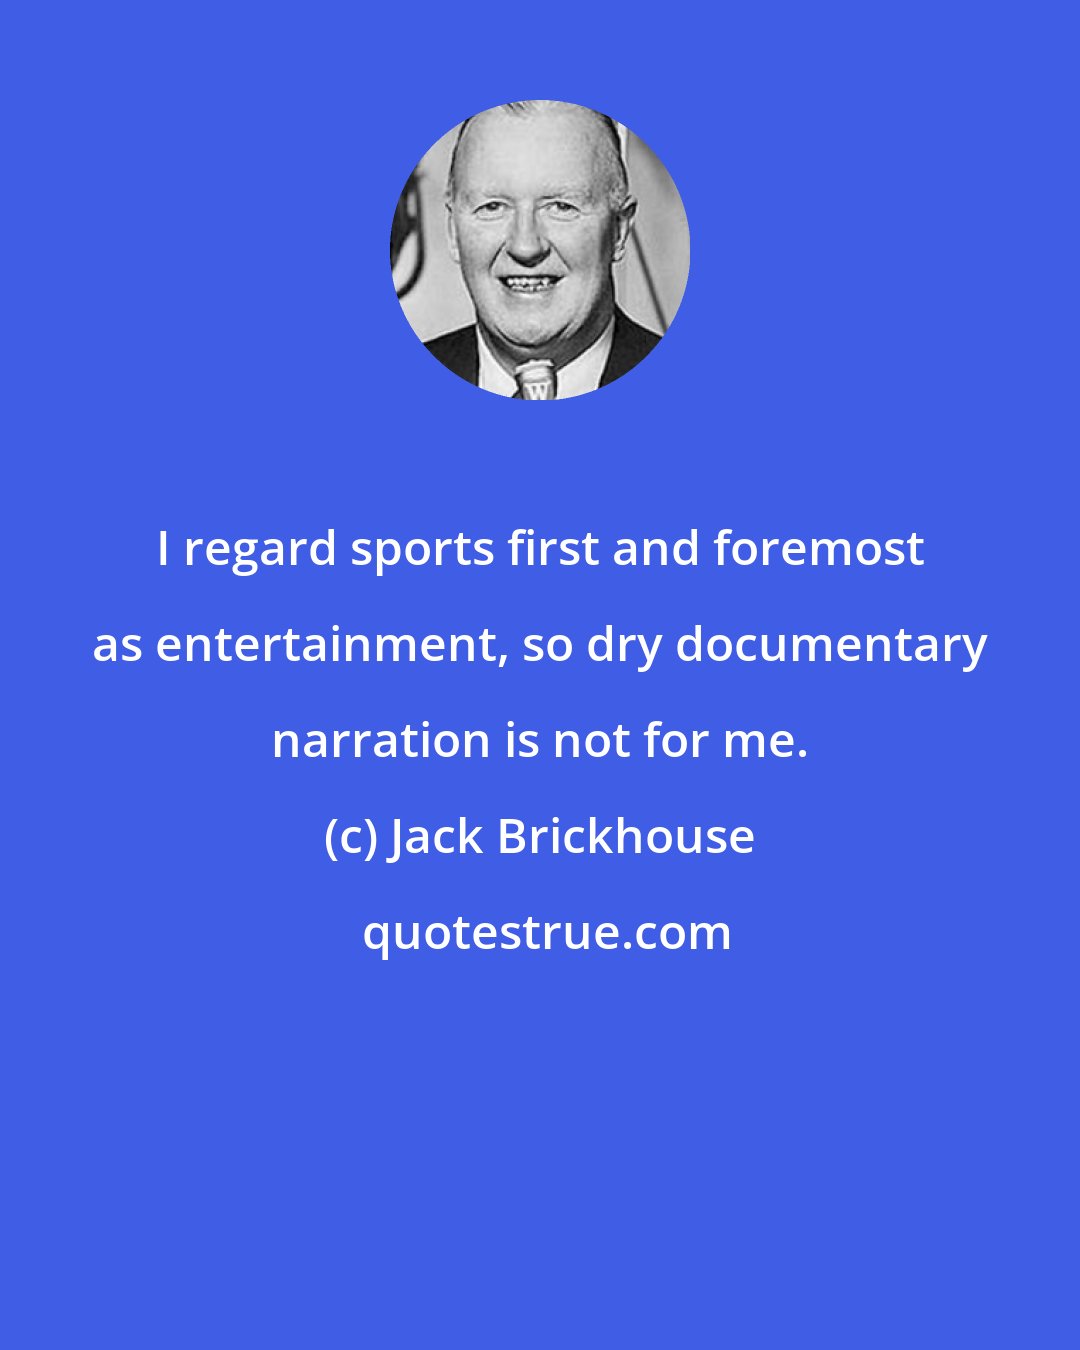 Jack Brickhouse: I regard sports first and foremost as entertainment, so dry documentary narration is not for me.